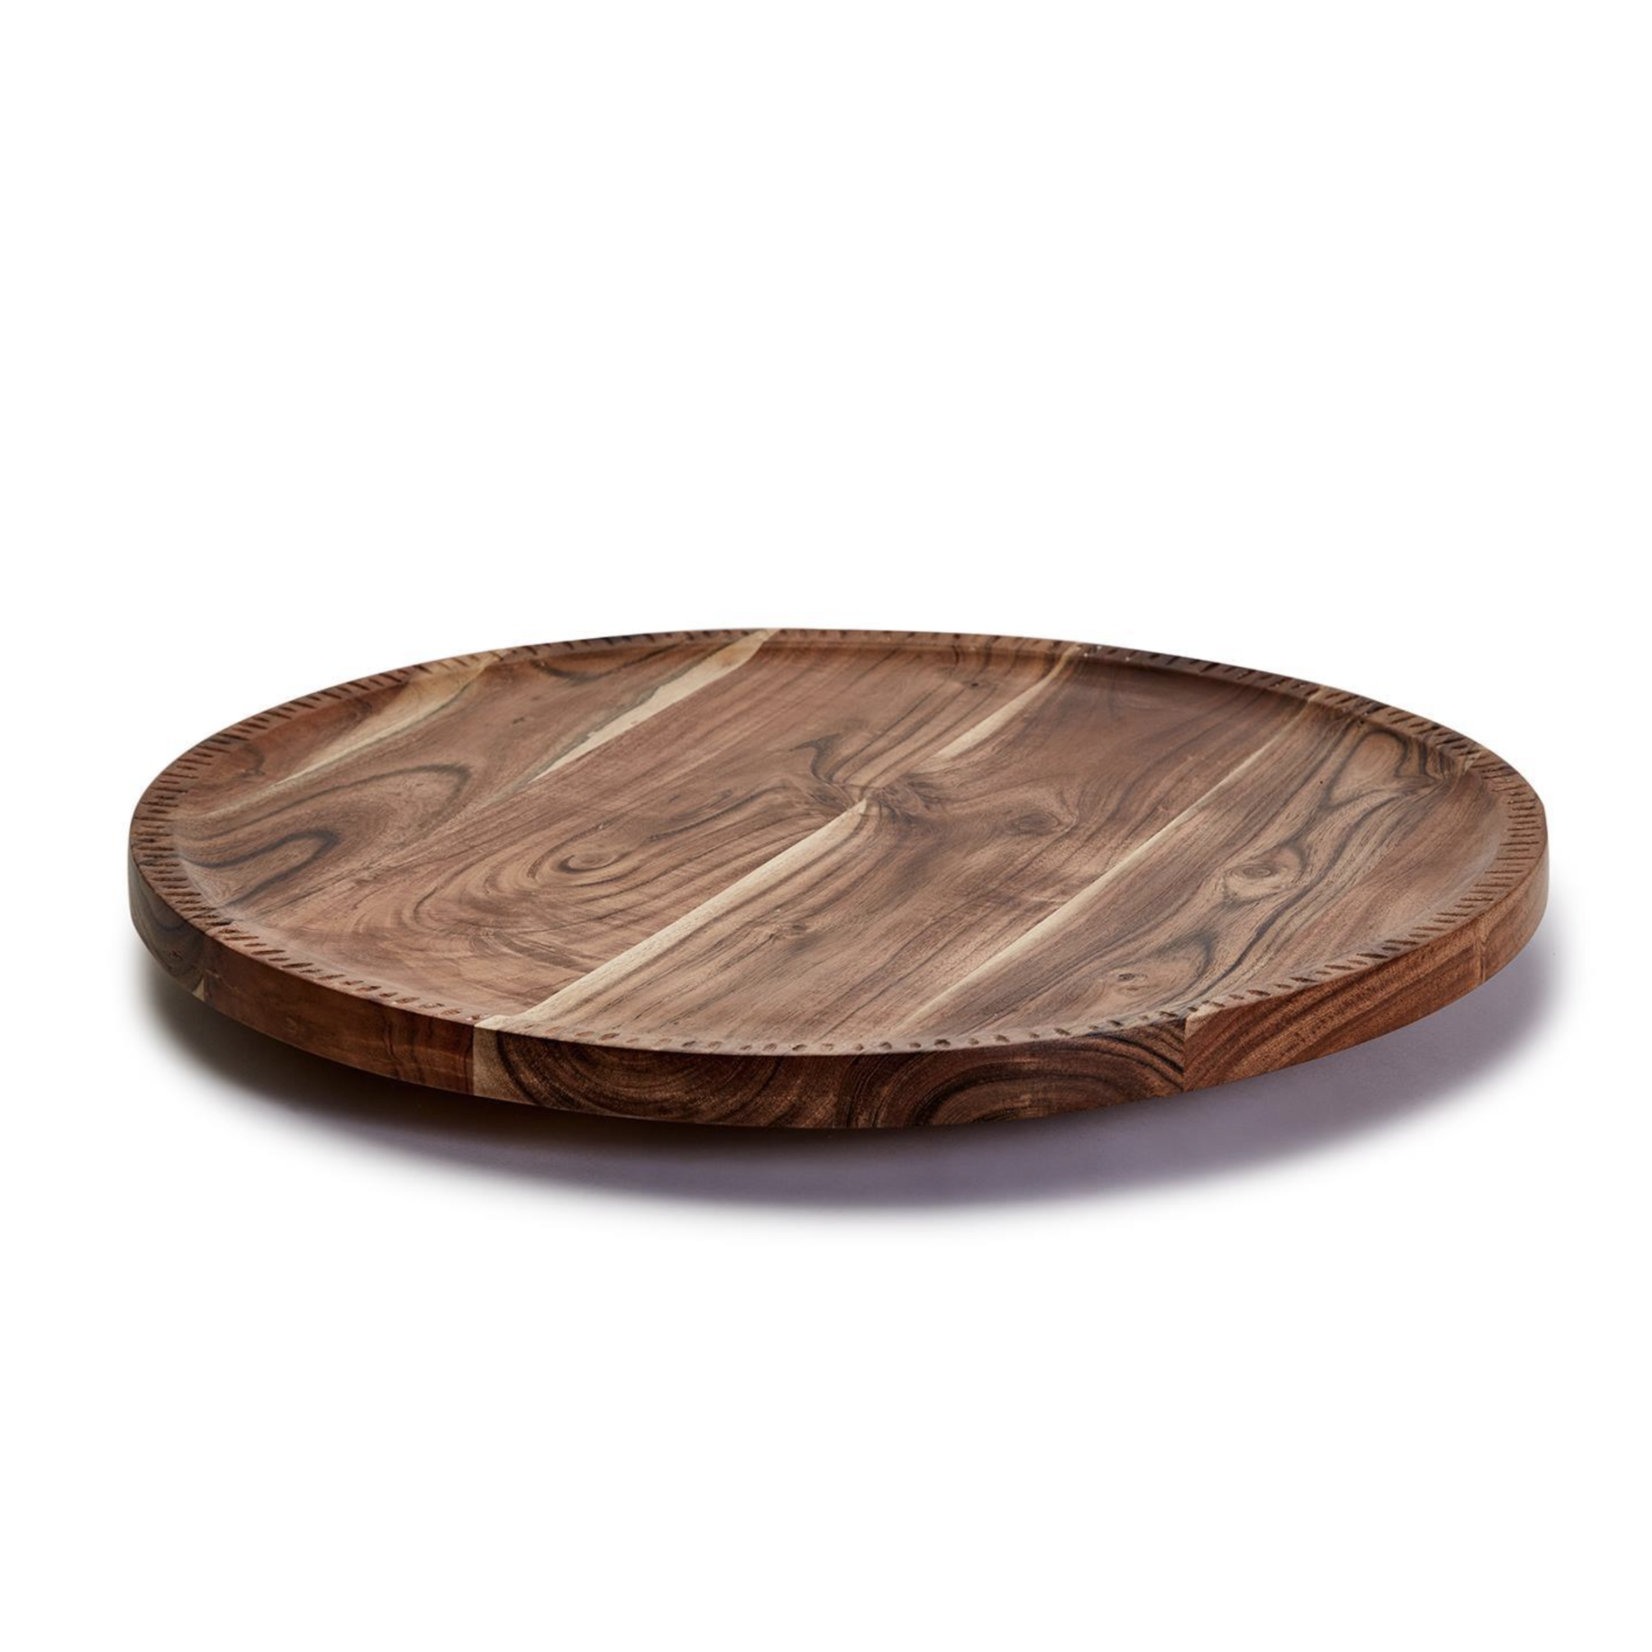 Outside The Box 20" Rotating Acacia Charcuterie Board With Hand Etched Border